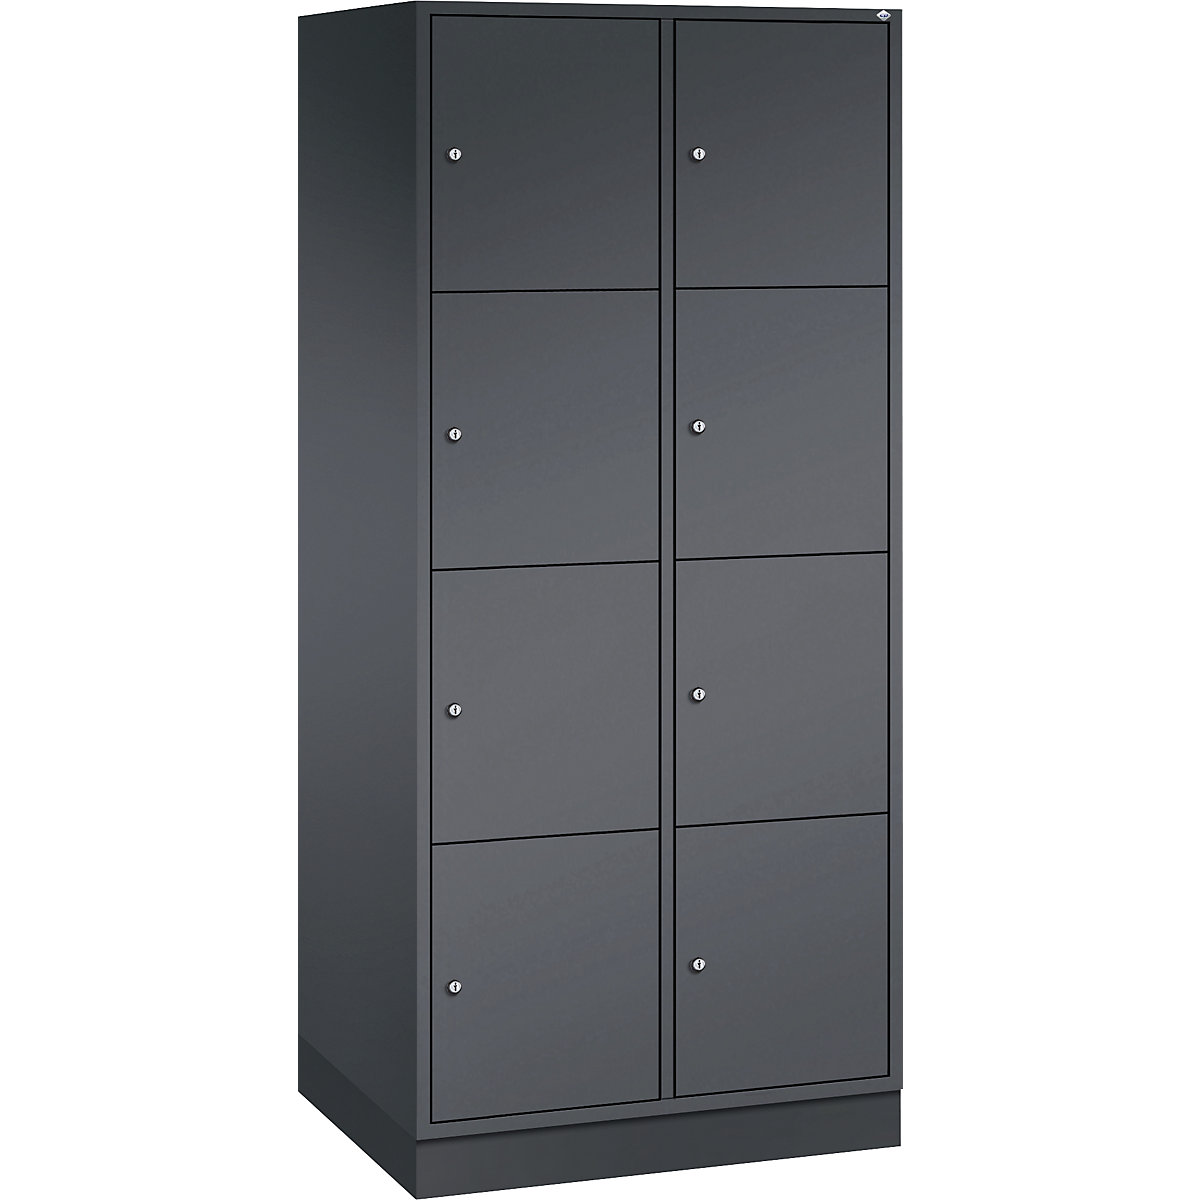 INTRO steel compartment locker, compartment height 435 mm – C+P, WxD 820 x 600 mm, 8 compartments, black grey body, black grey doors